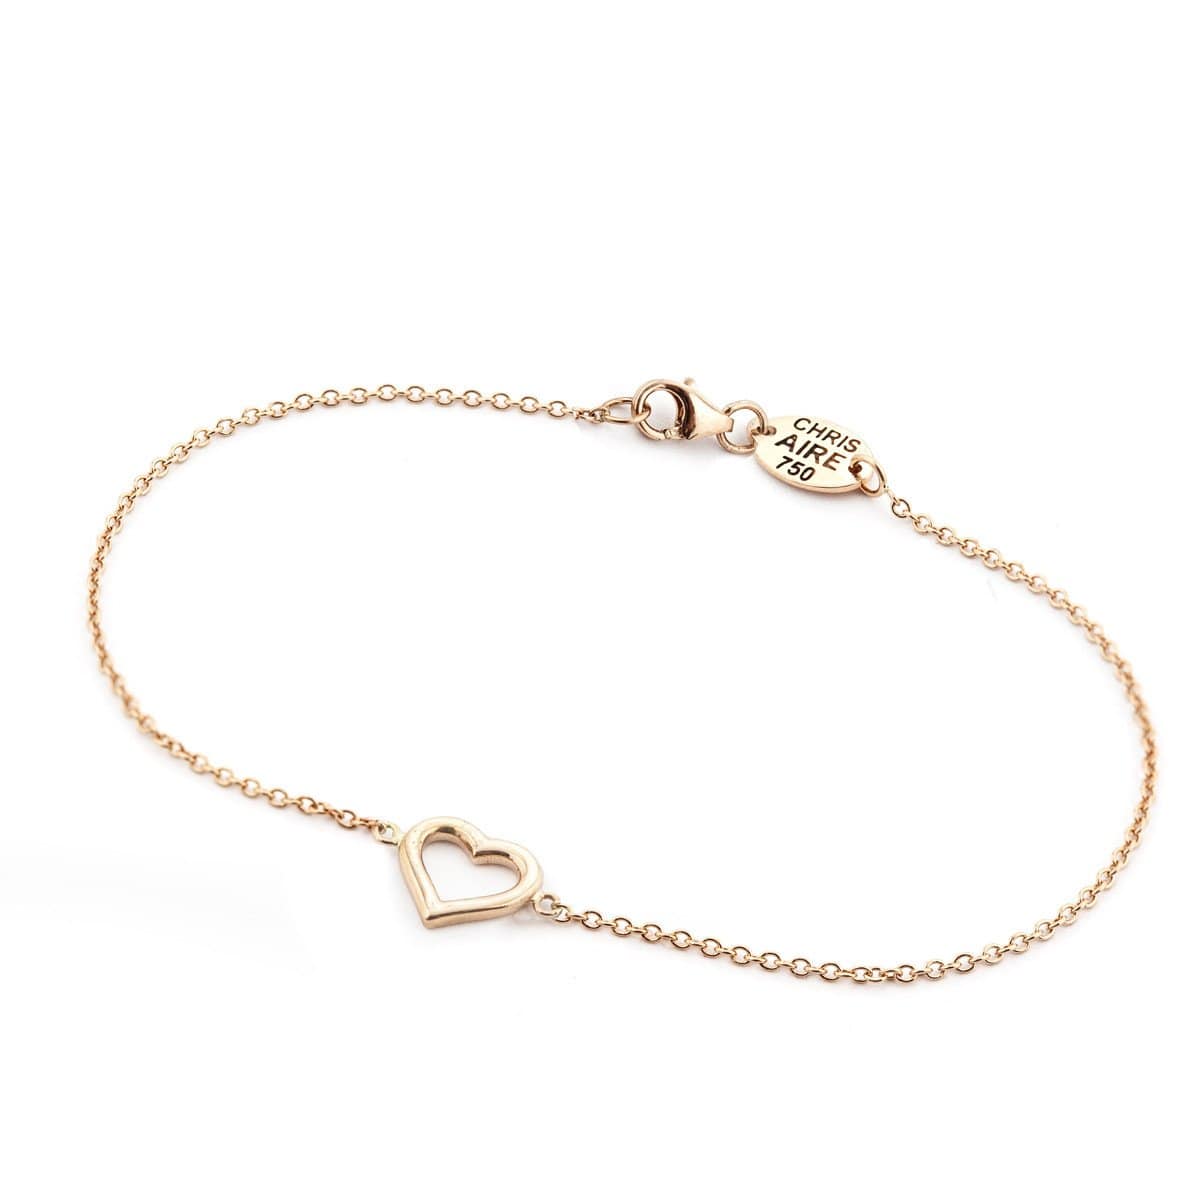 HEART BRACELET-Amber Hue - Chris Aire Fine Jewelry & Timepieces